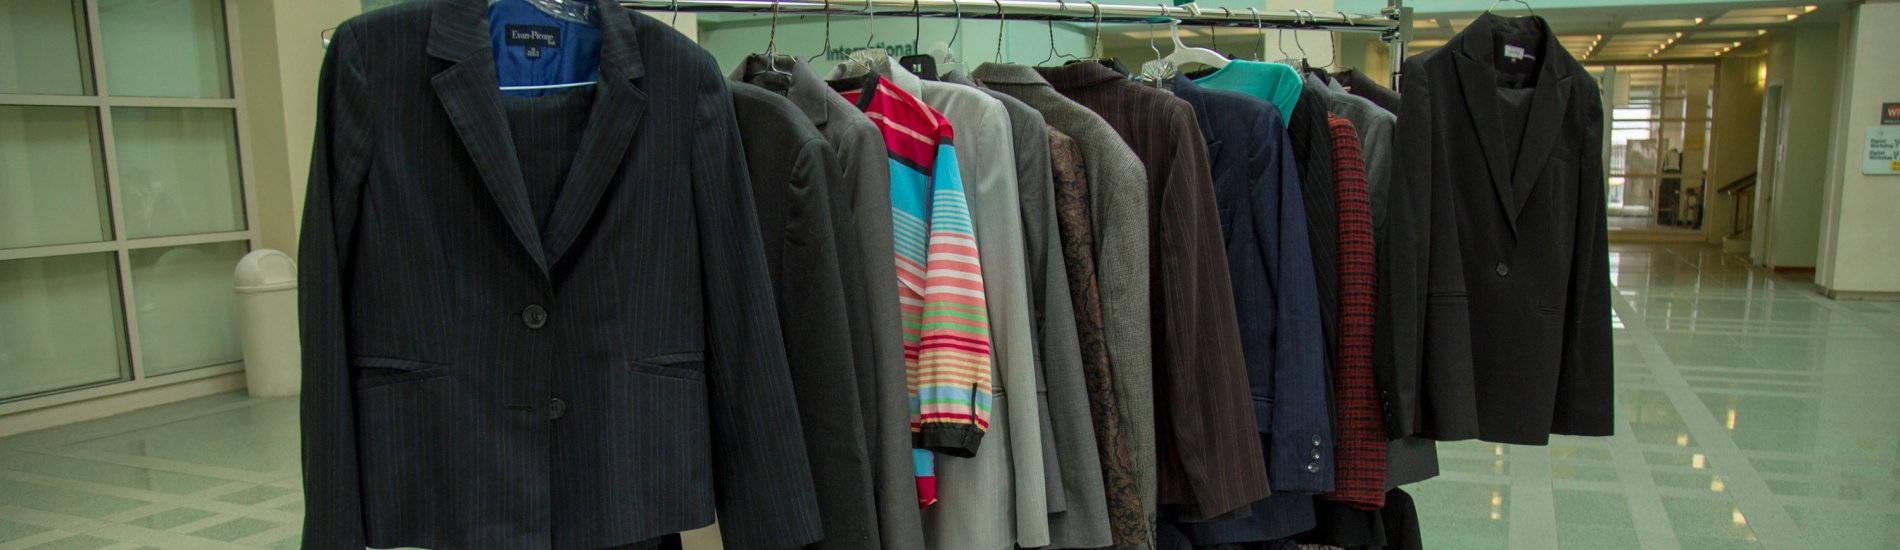 A clothing rack loaded with suits and other professional clothing is positioned inside an atrium.